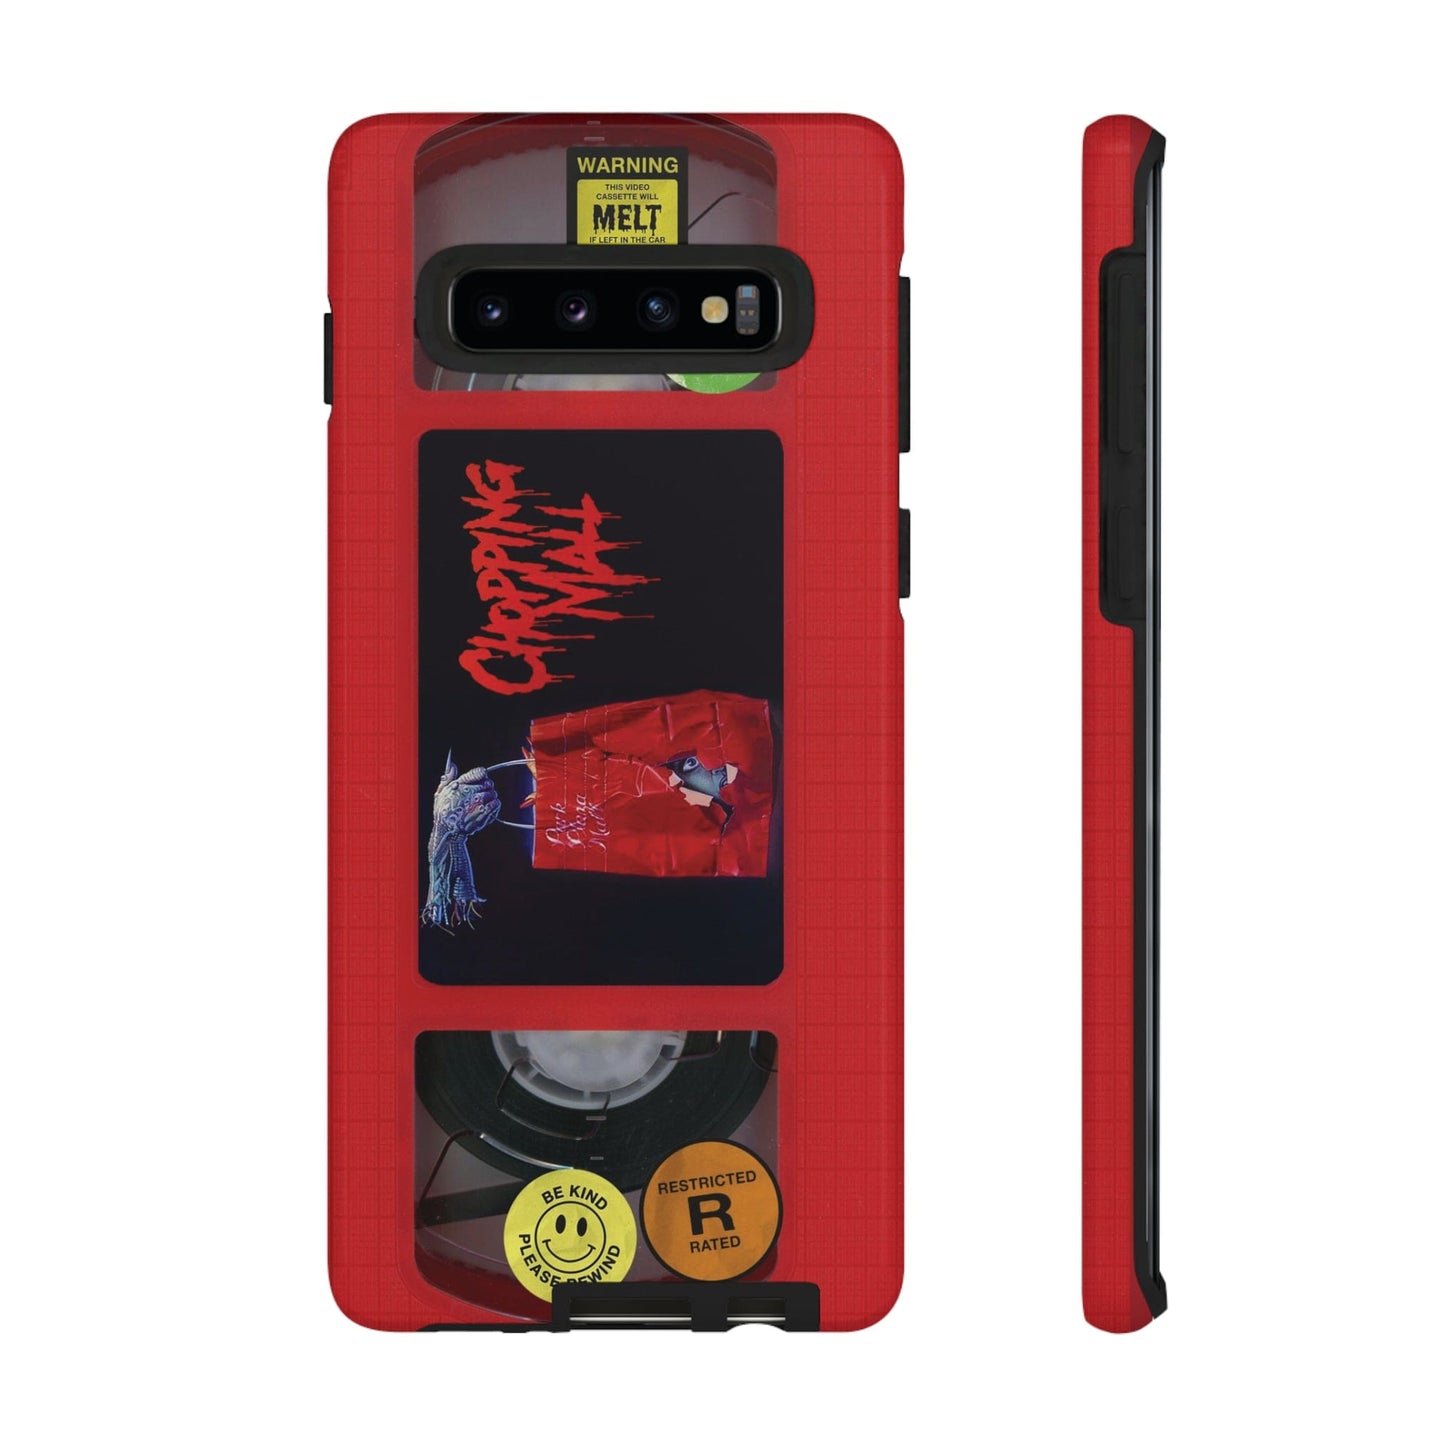 Chopping Mall Red Edition VHS Phone Case